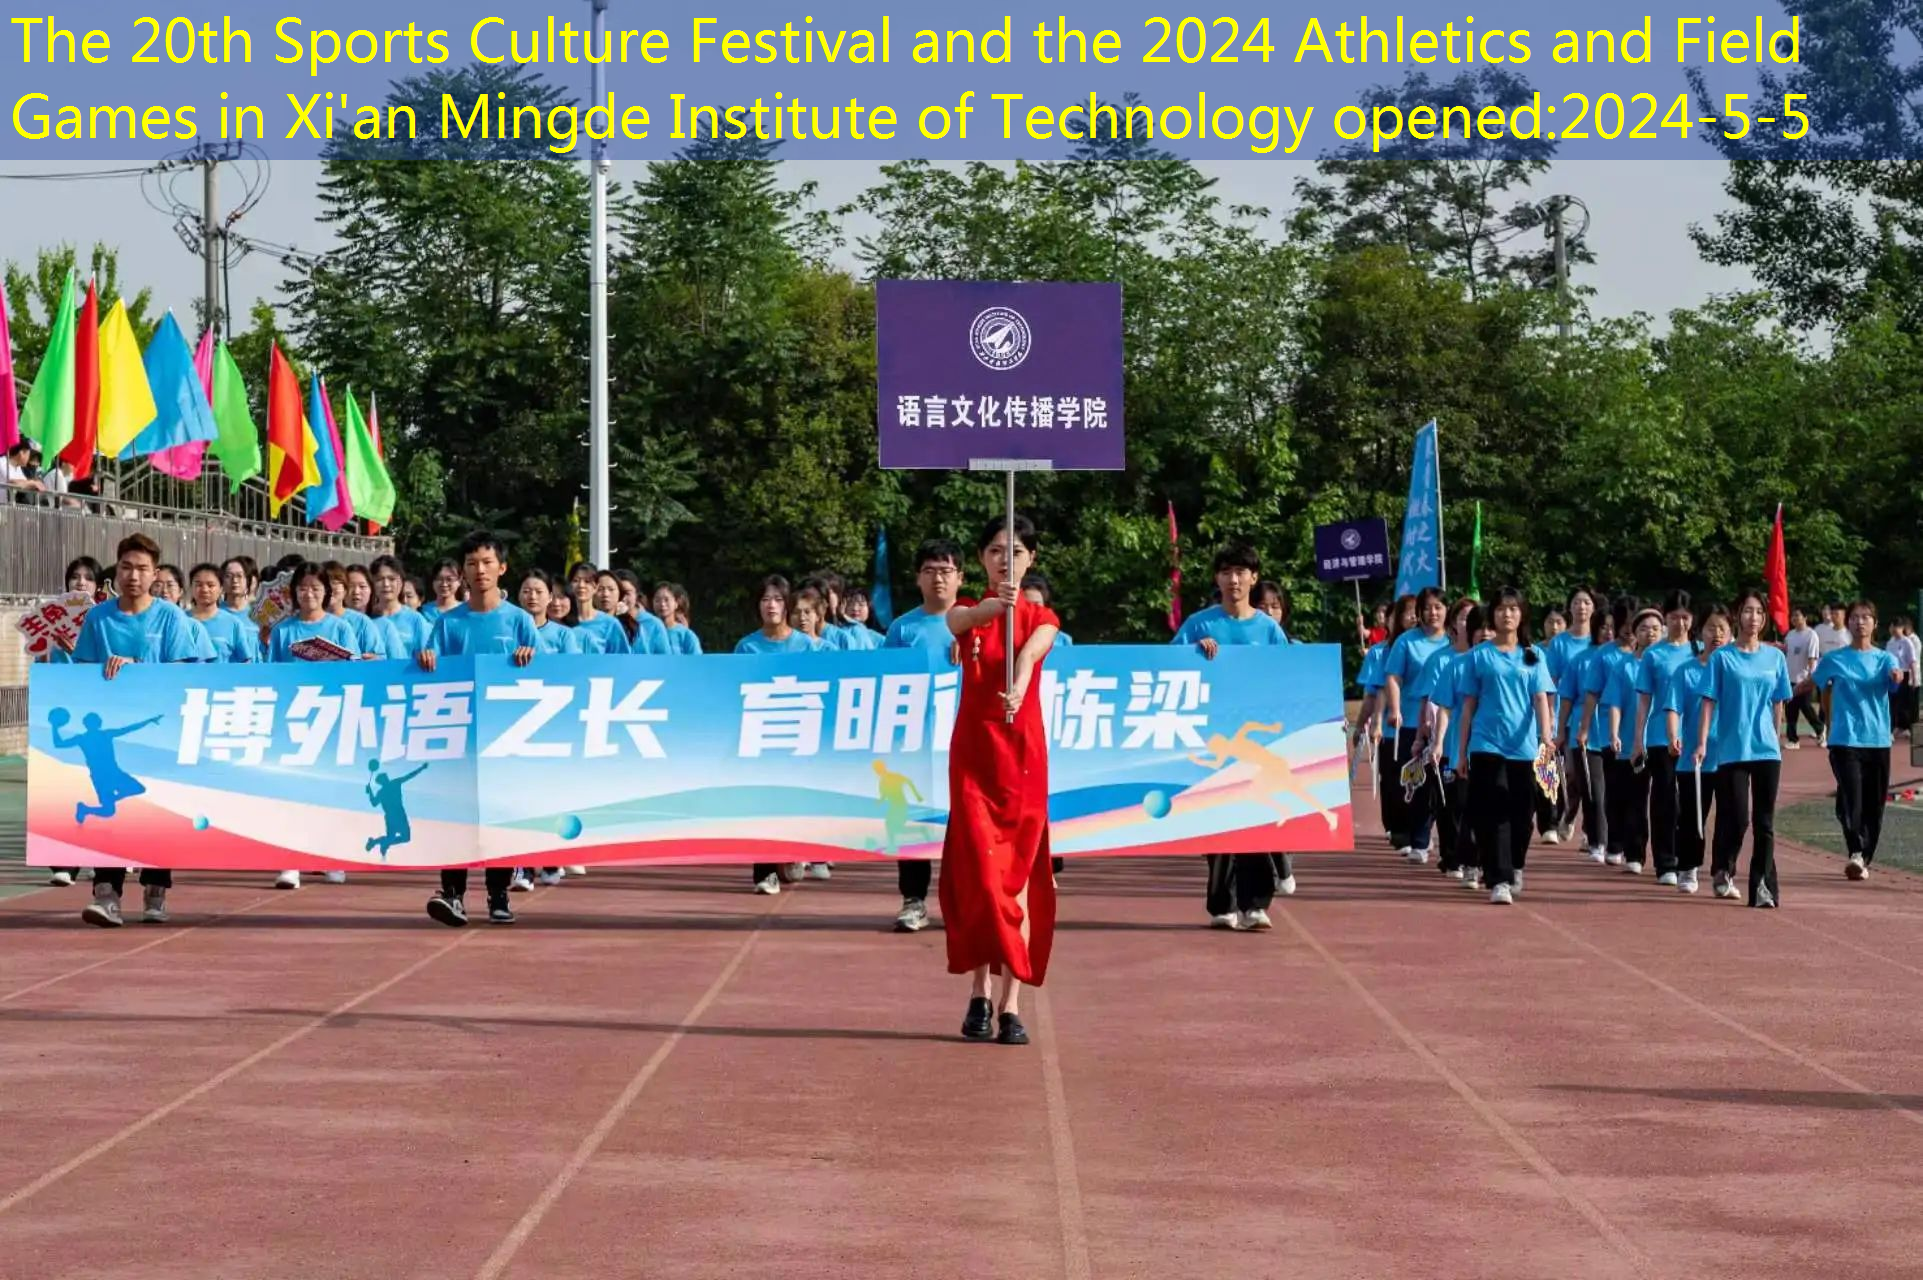 The 20th Sports Culture Festival and the 2024 Athletics and Field Games in Xi’an Mingde Institute of Technology opened